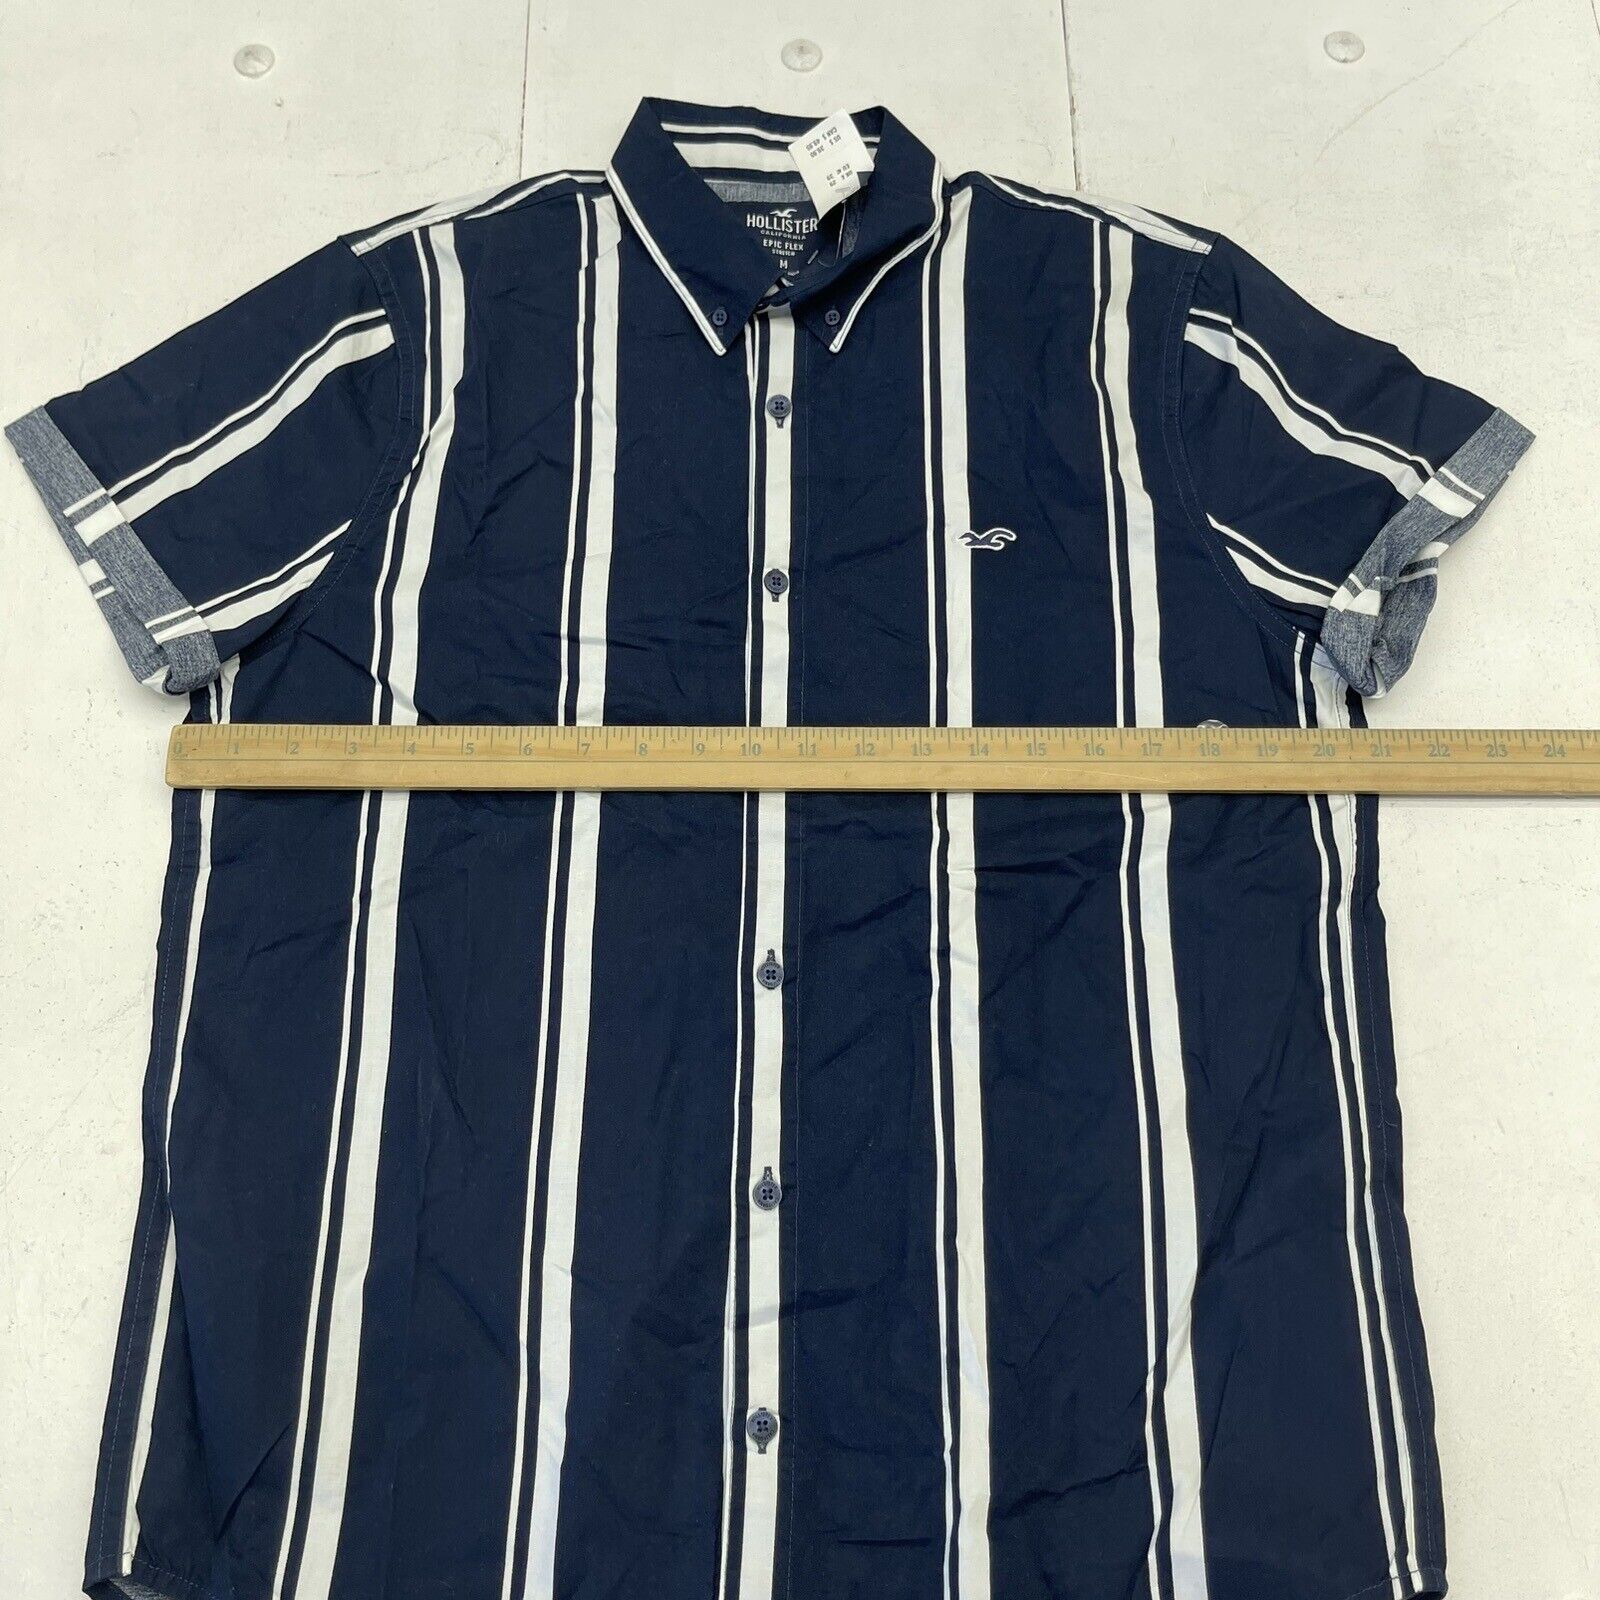 Hollister Navy Blue & White Striped Button Down Blouse